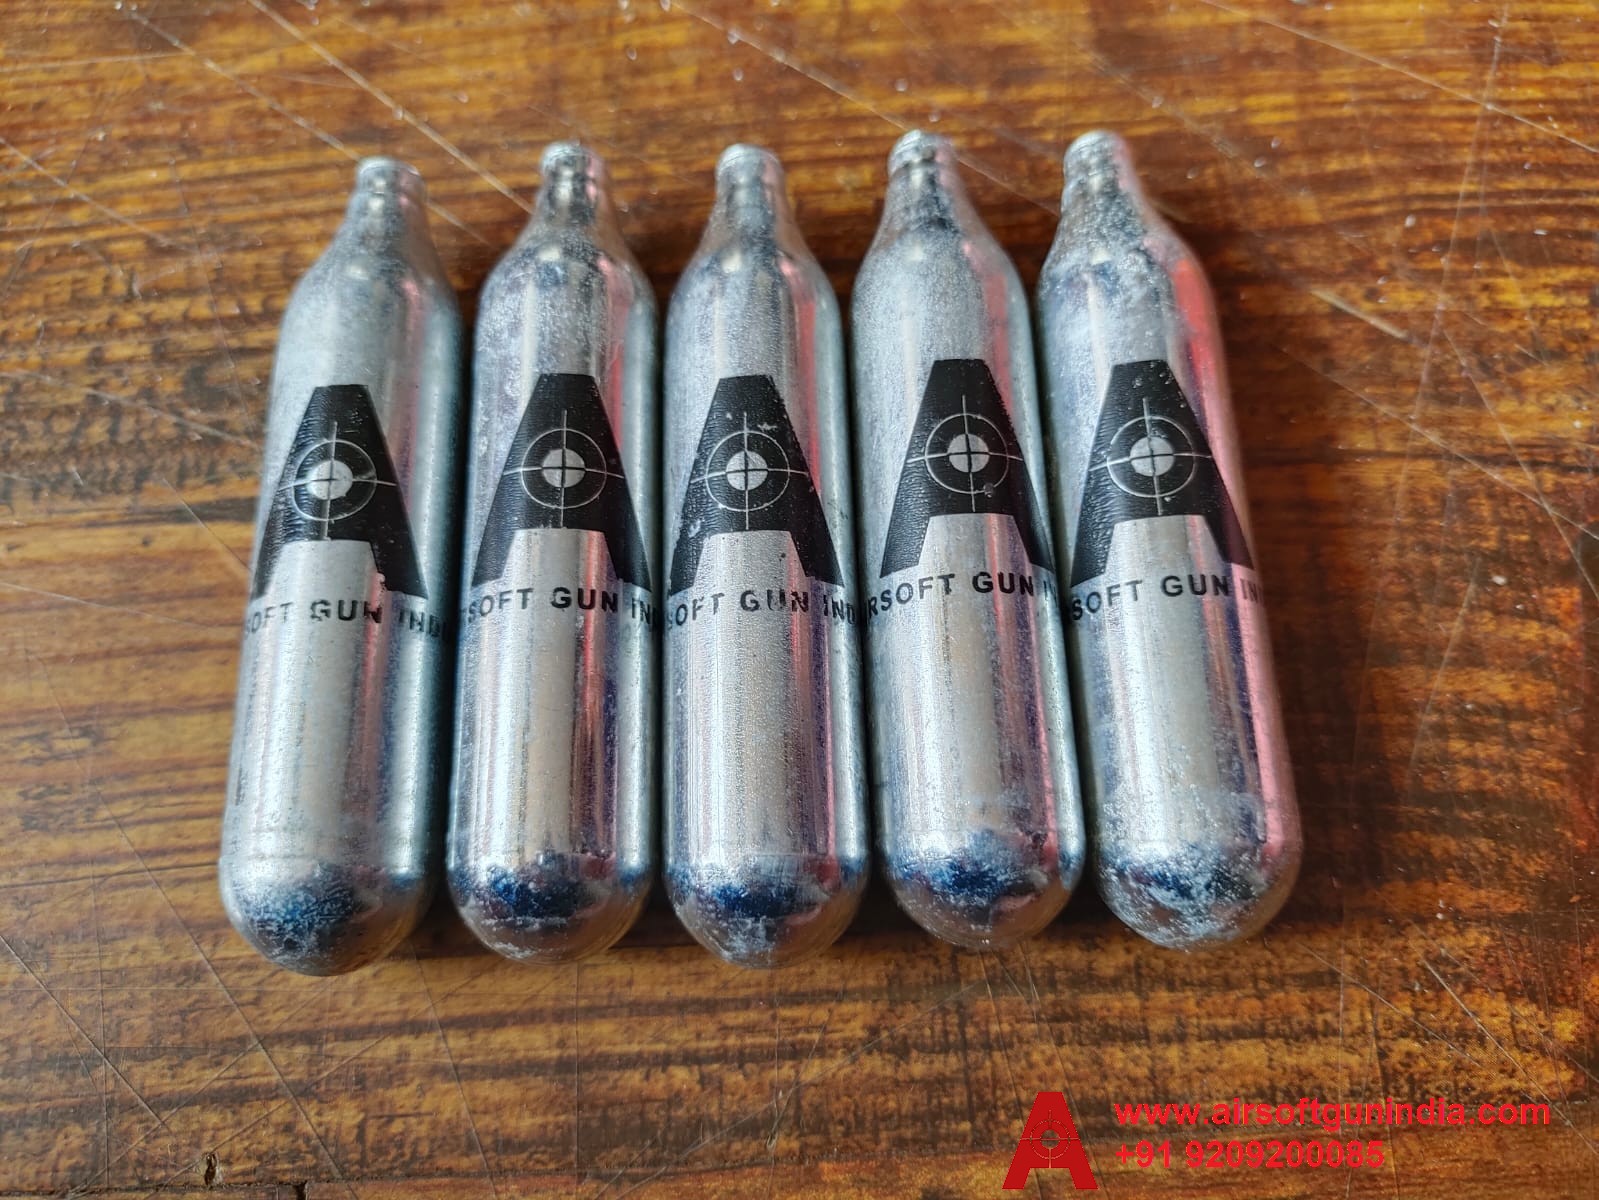 12 G Co2 Cartridges Pack Of 50 For Co2 Guns BY AIRSOFT GUN INDIA 